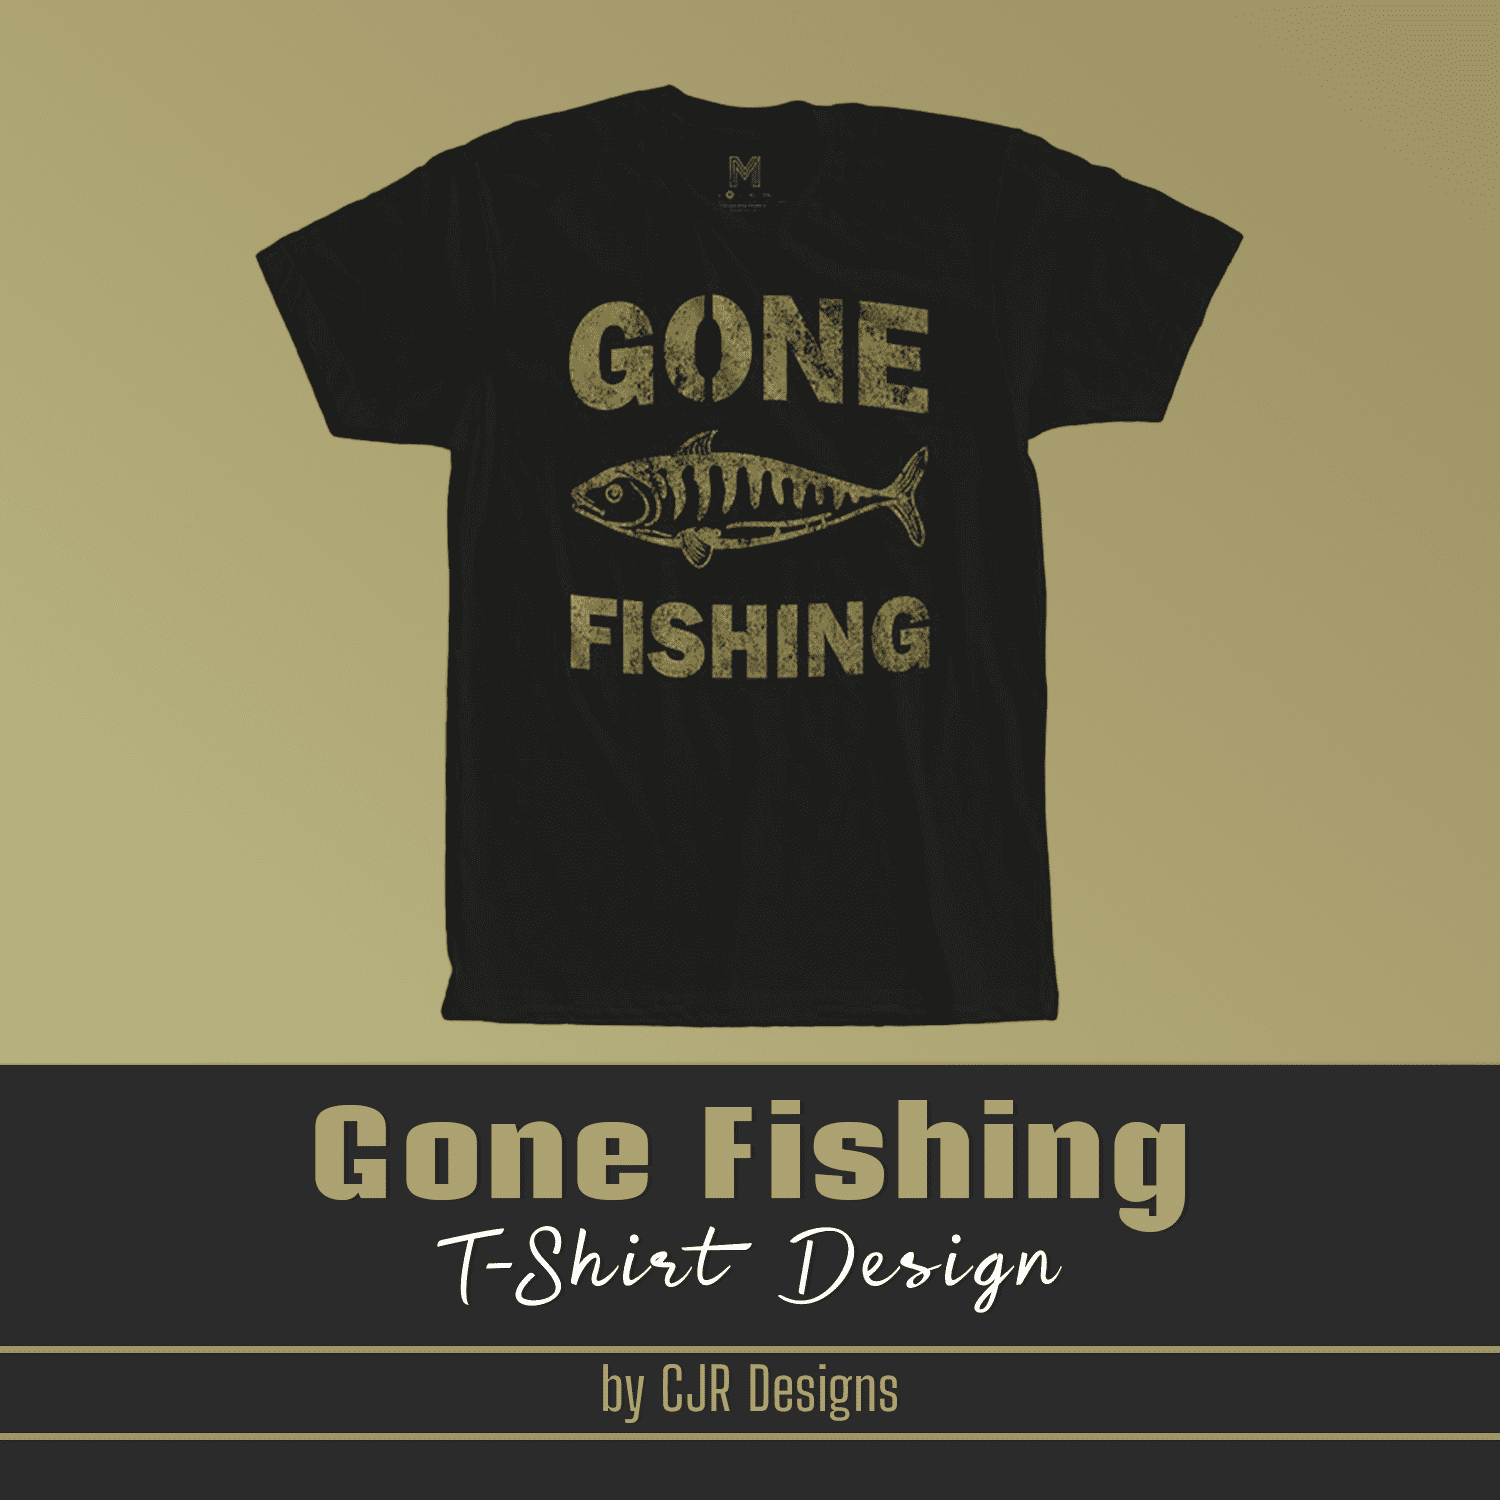 Black t-shirt with adorable fish print and "gone fishing" slogan.